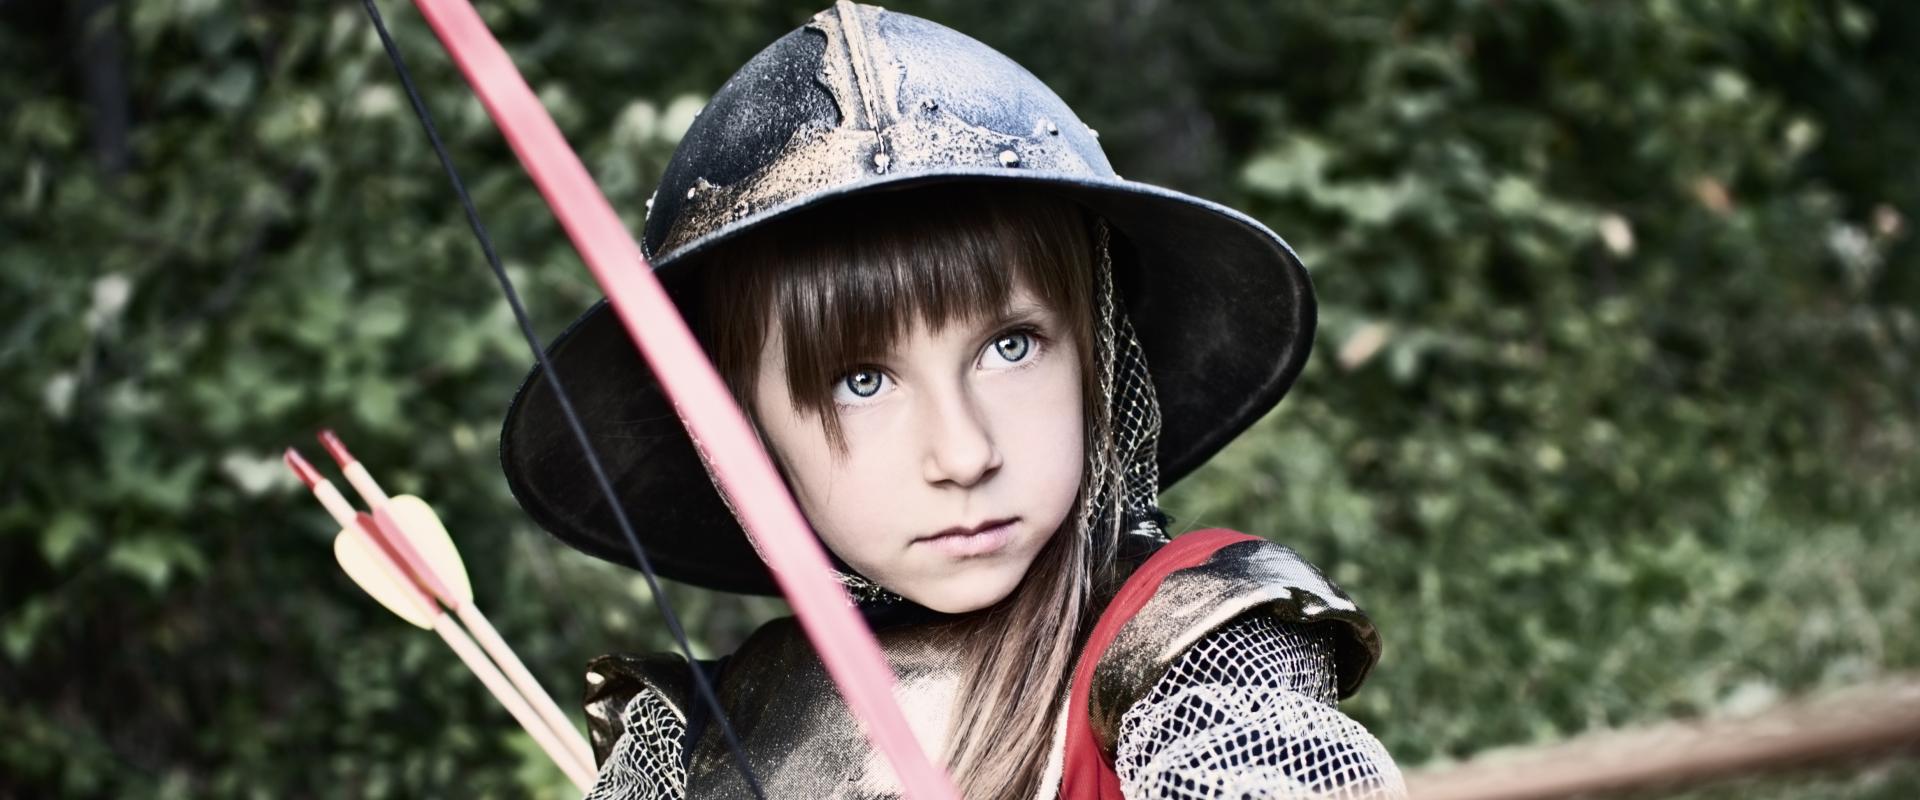 young girl in medieval armour with bow and arrow